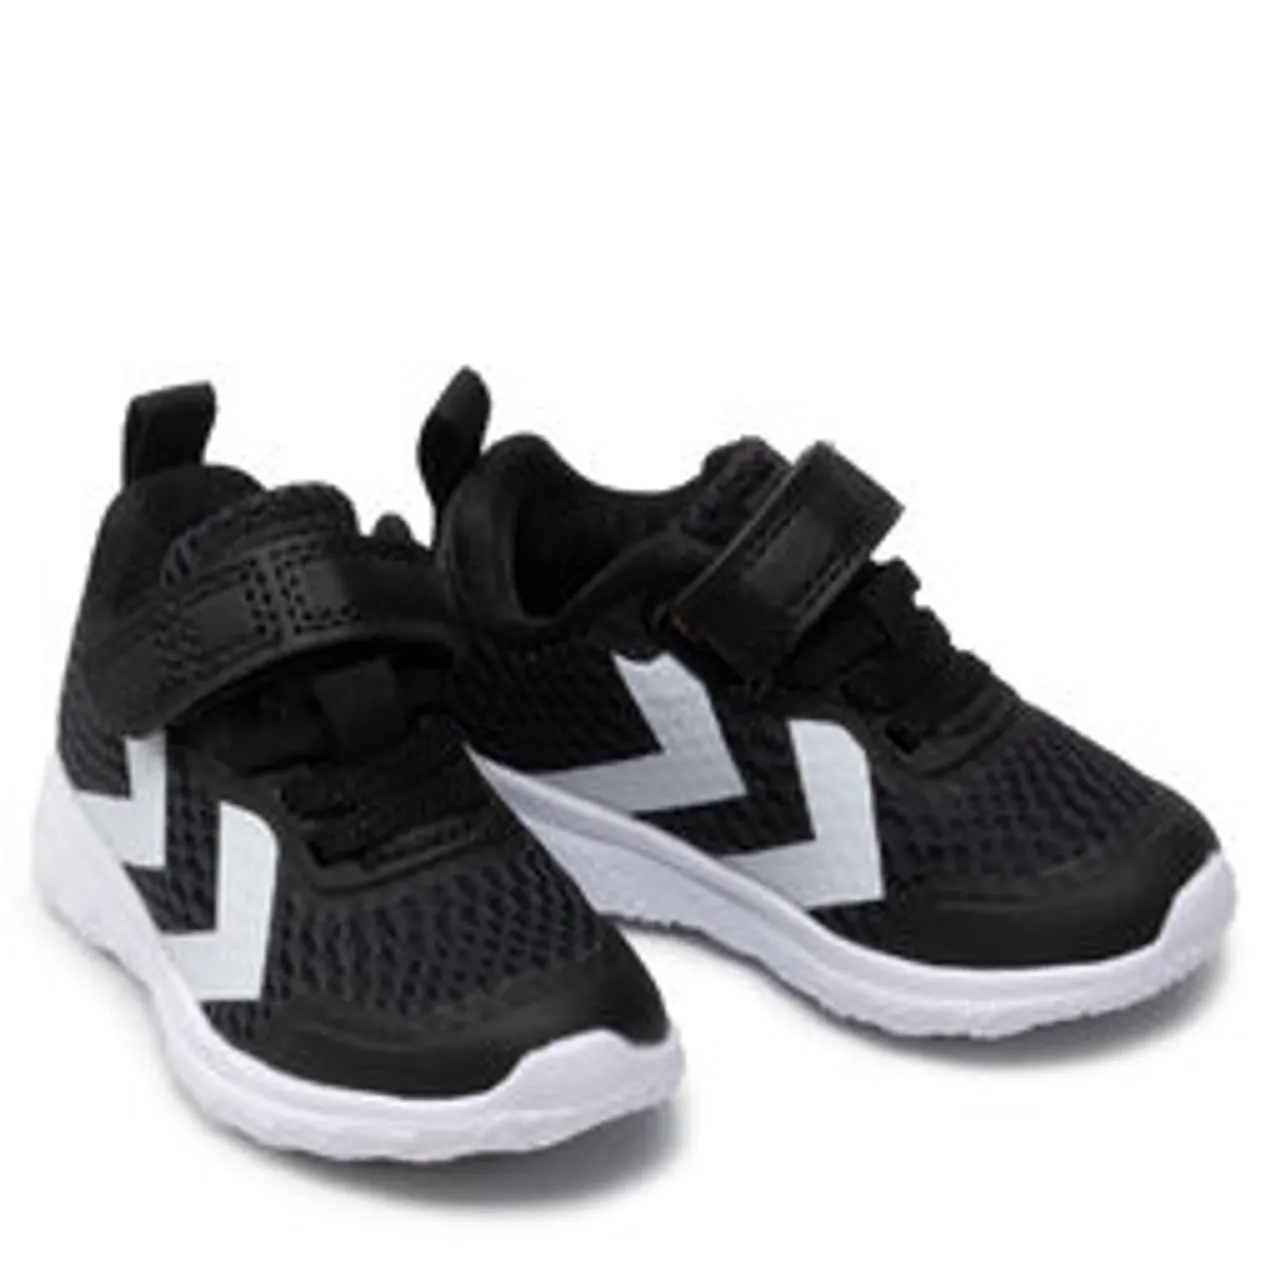 Sneakers Hummel Actus Recycled Infant 215992-2001 Black